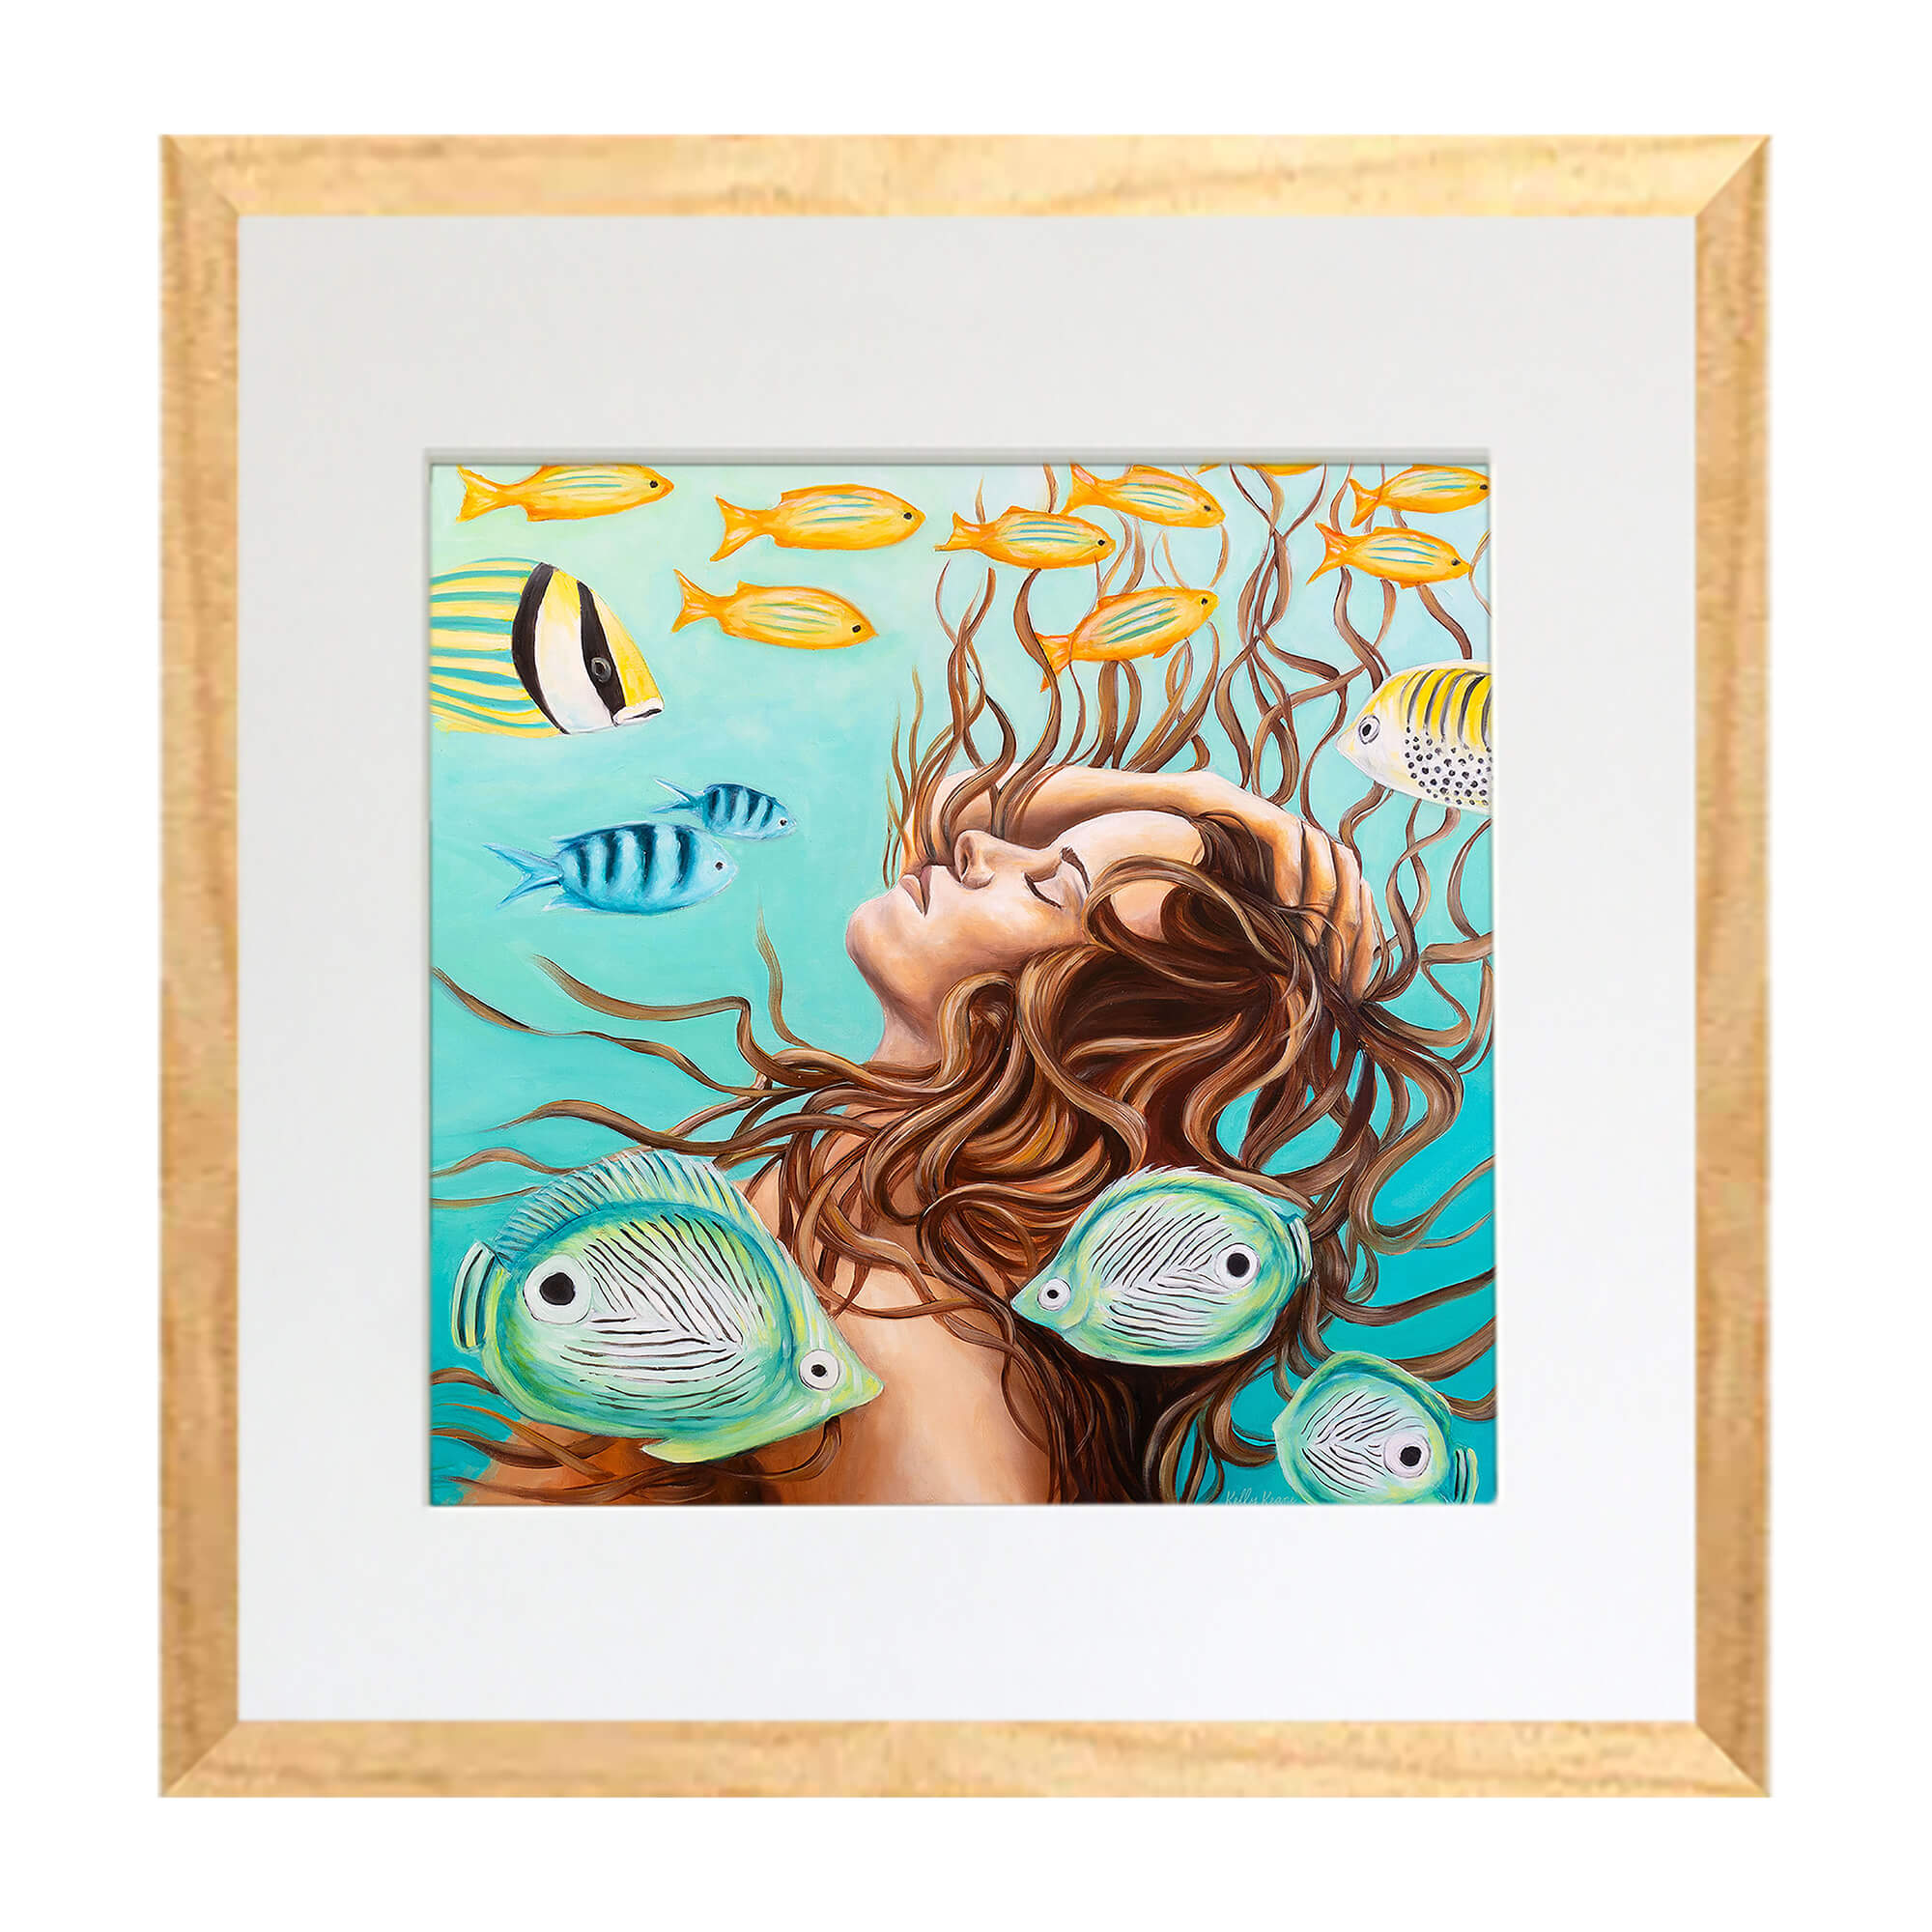 Matted art print featuring a woman underwater with some tropical fish by Hawaii artist Kelly Keane